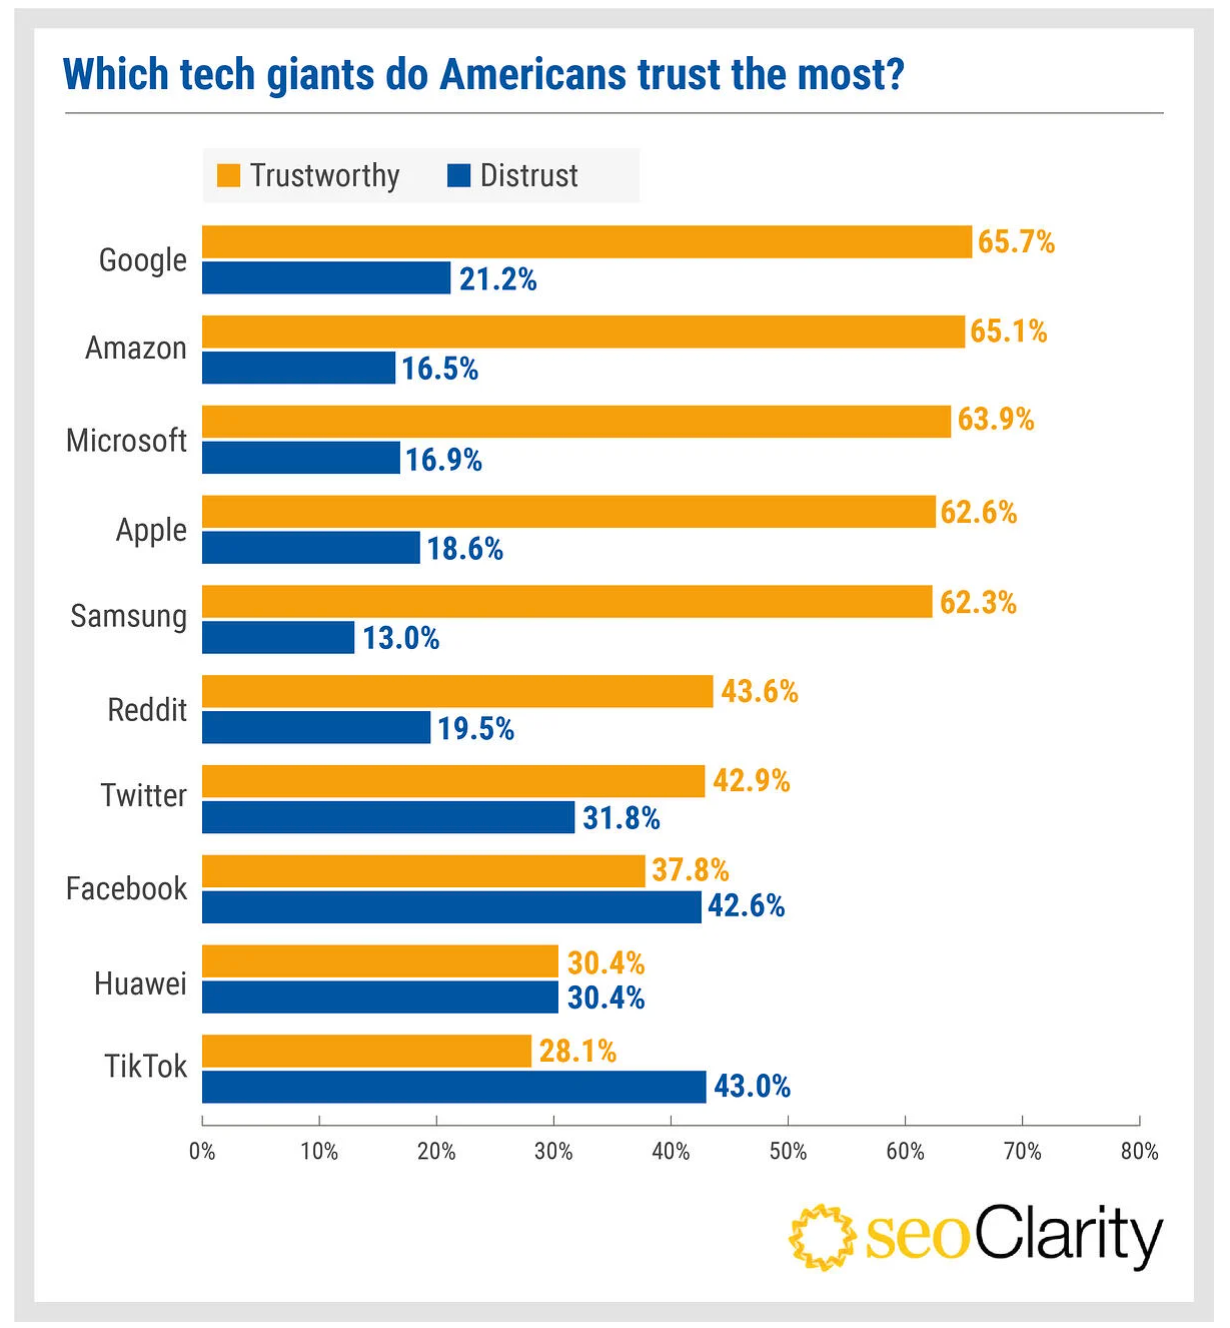 Survey results on which tech giants Americans trust